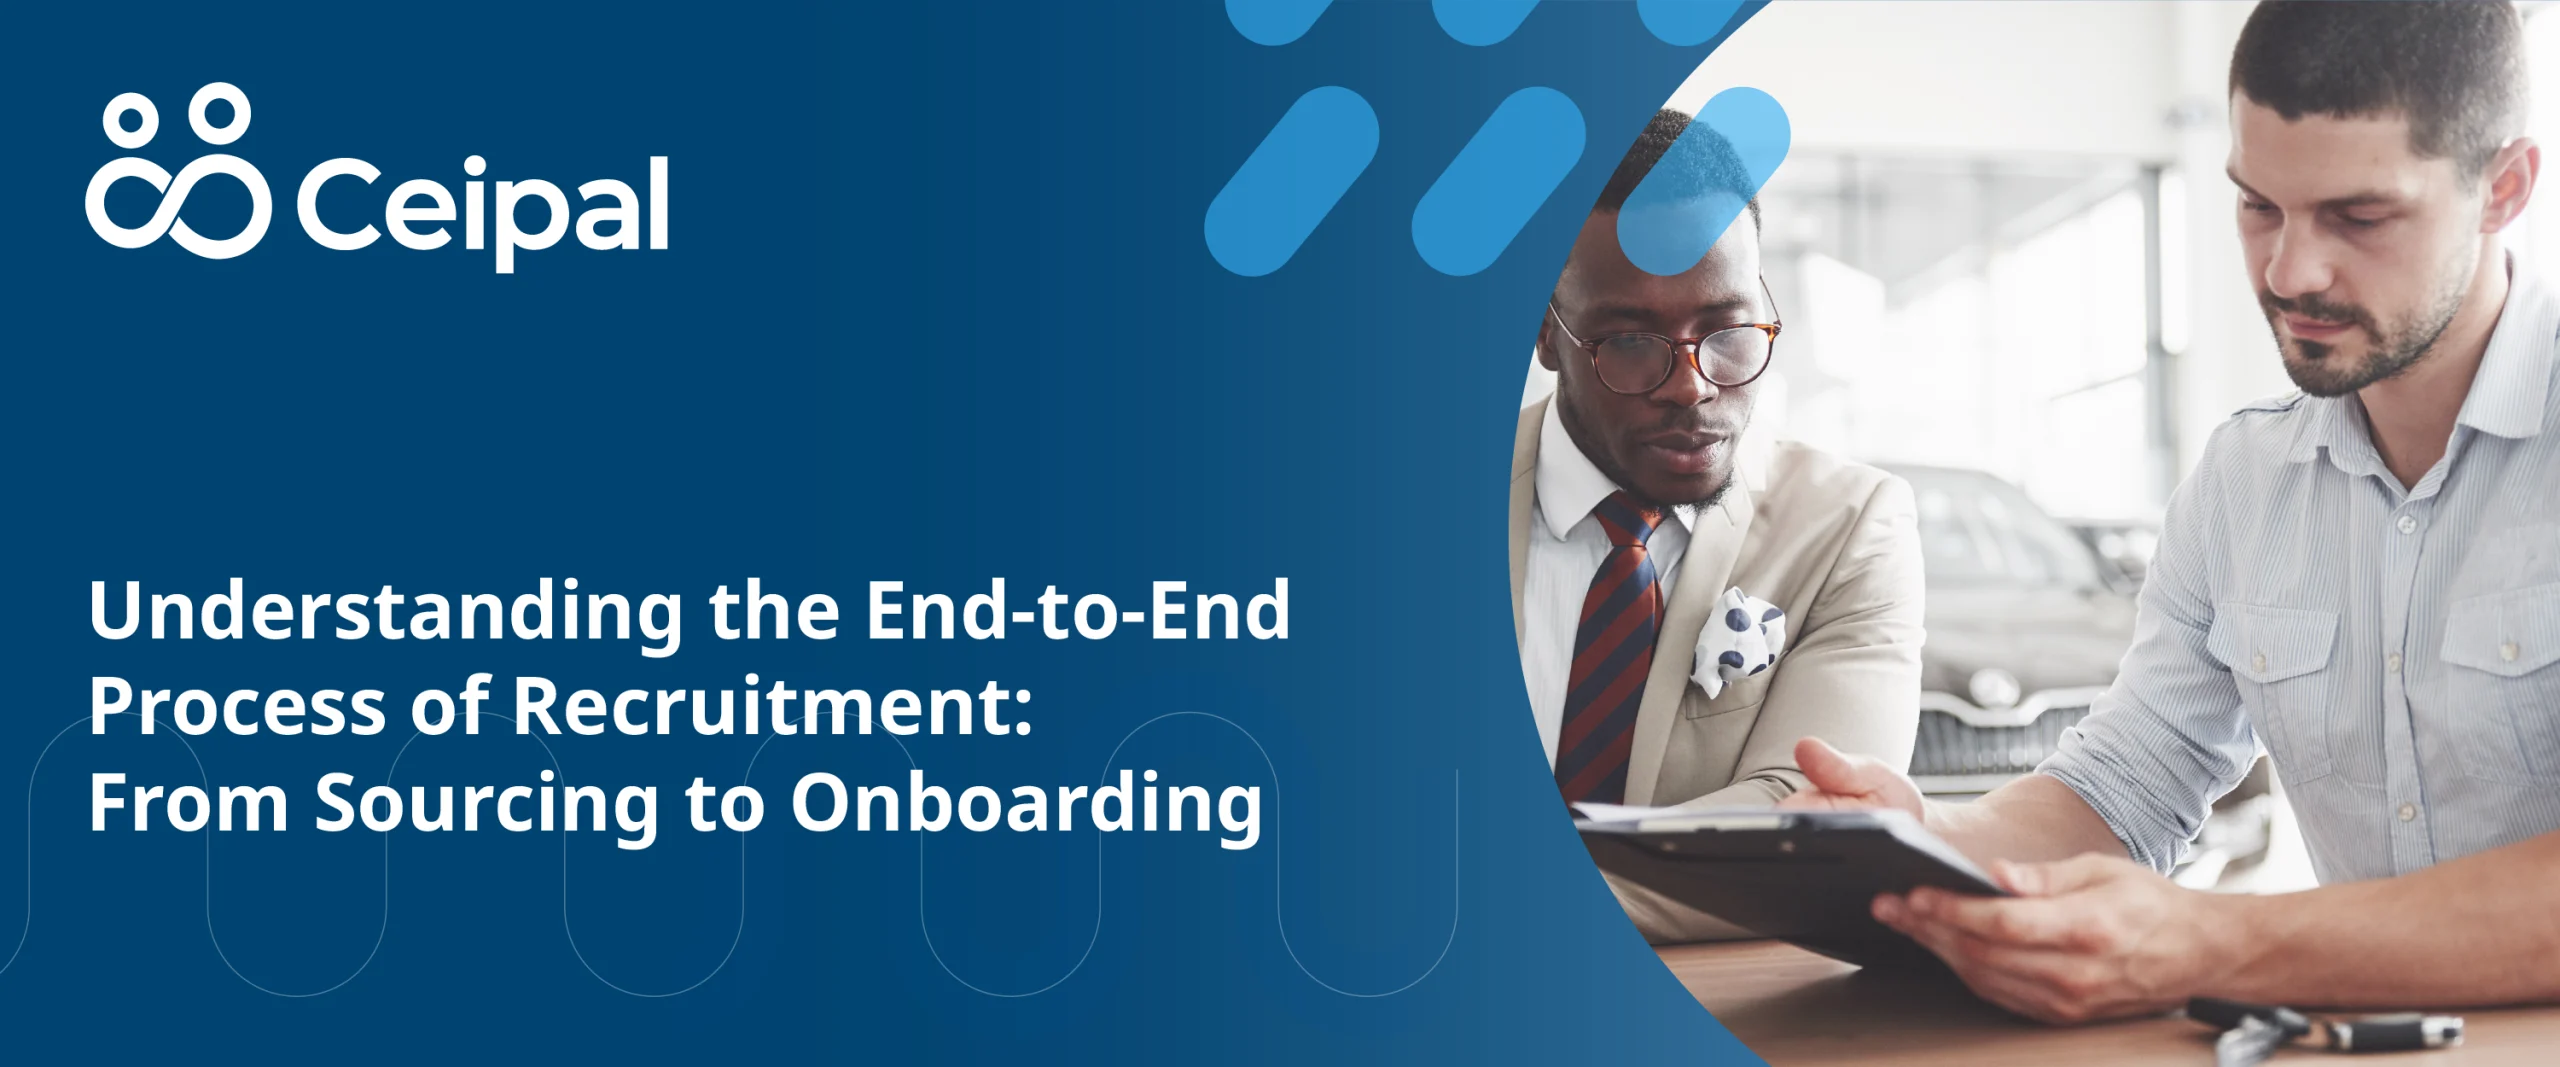 Understanding the End-to-End Process of Recruitment: From Sourcing to Onboarding